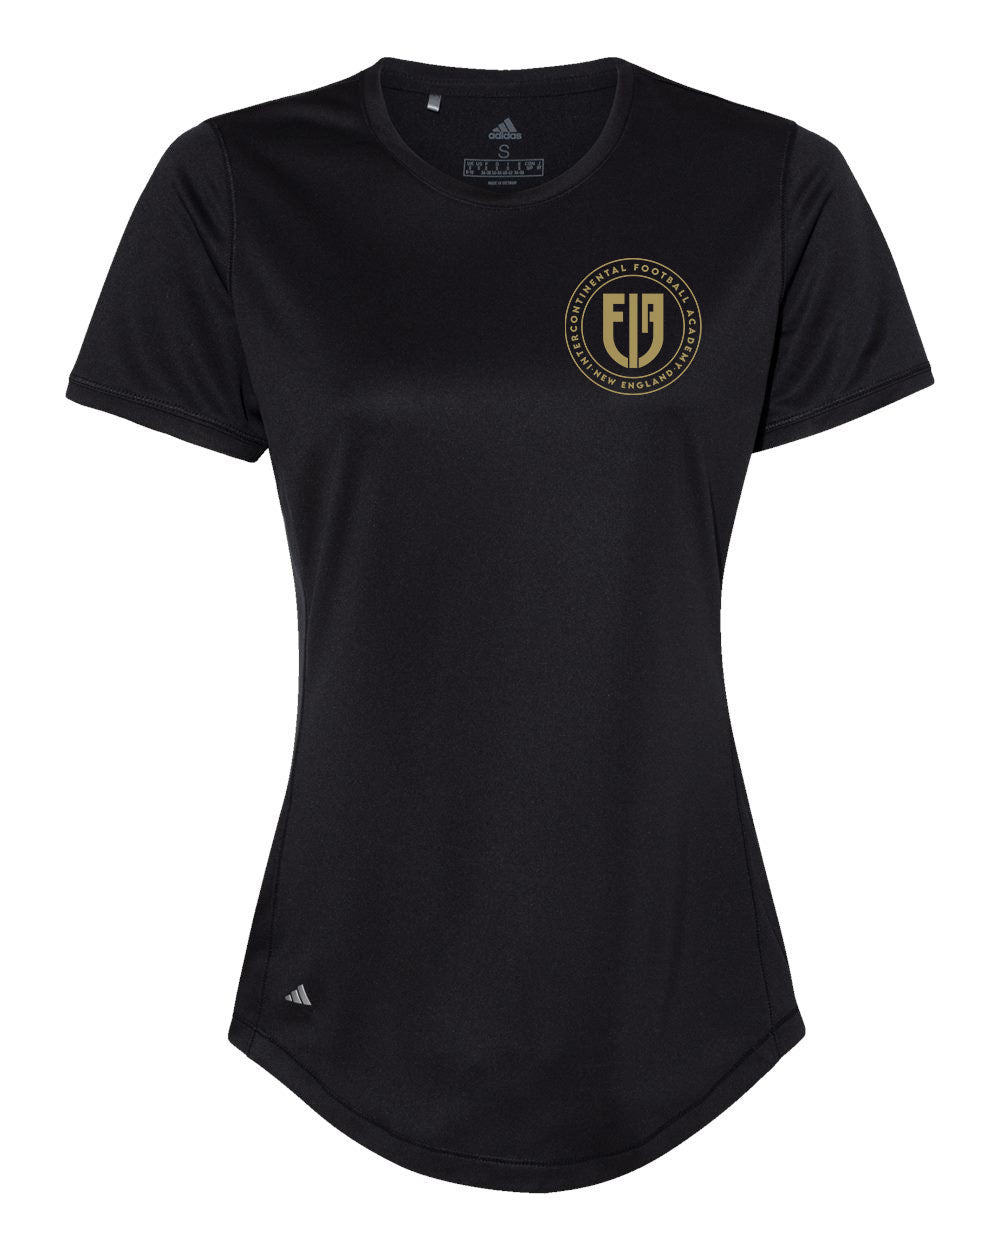 IFA Adidas Ladies Sport Shirt "Classic Corner" - A377 (color options available)